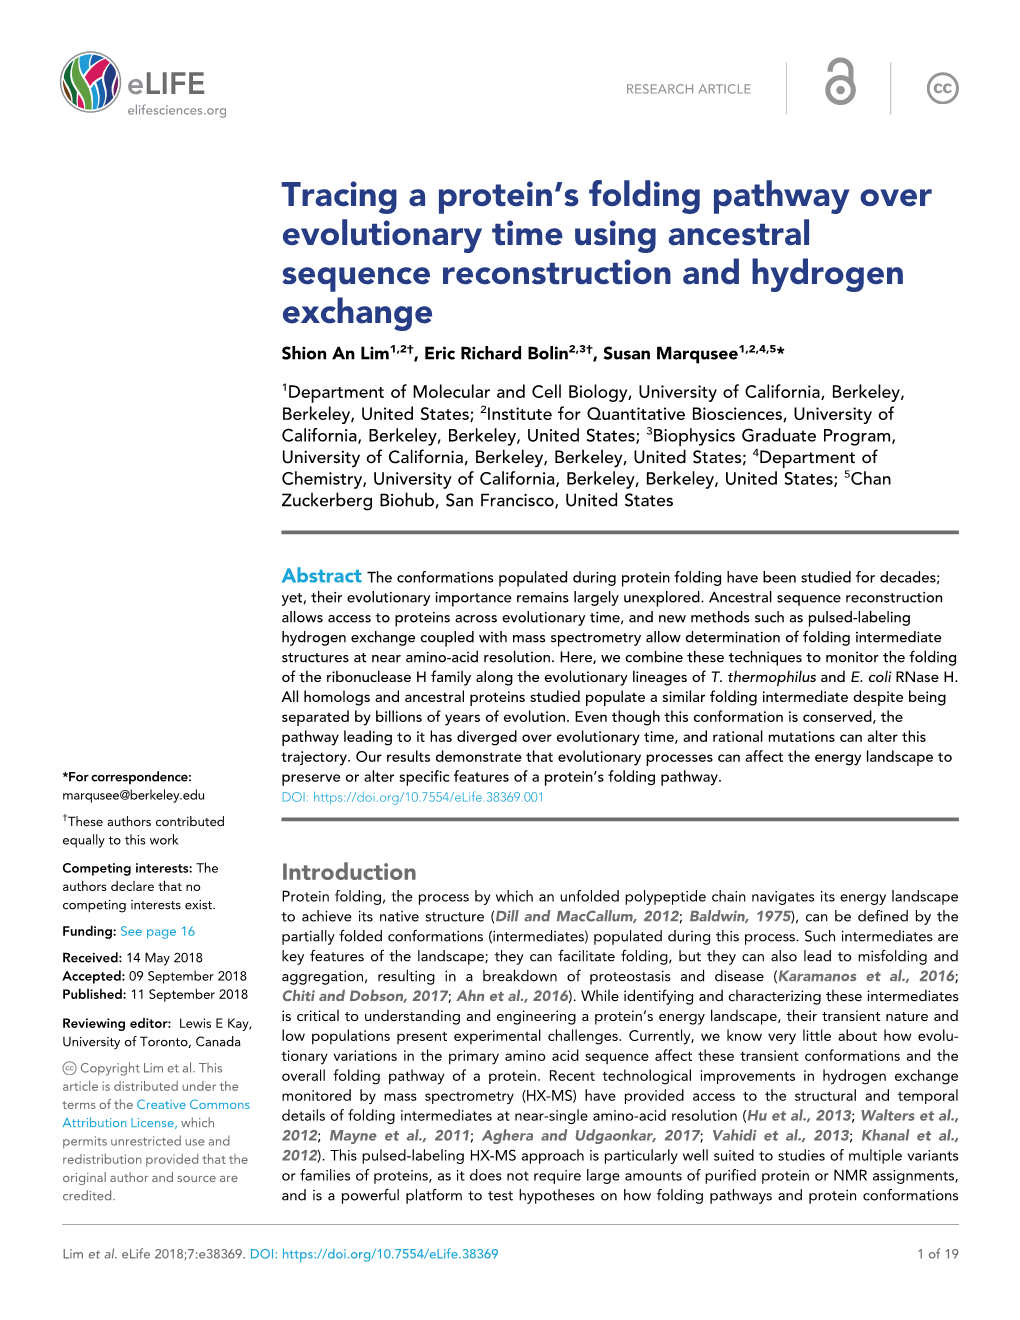 Tracing a Protein's Folding Pathway Over Evolutionary Time Using